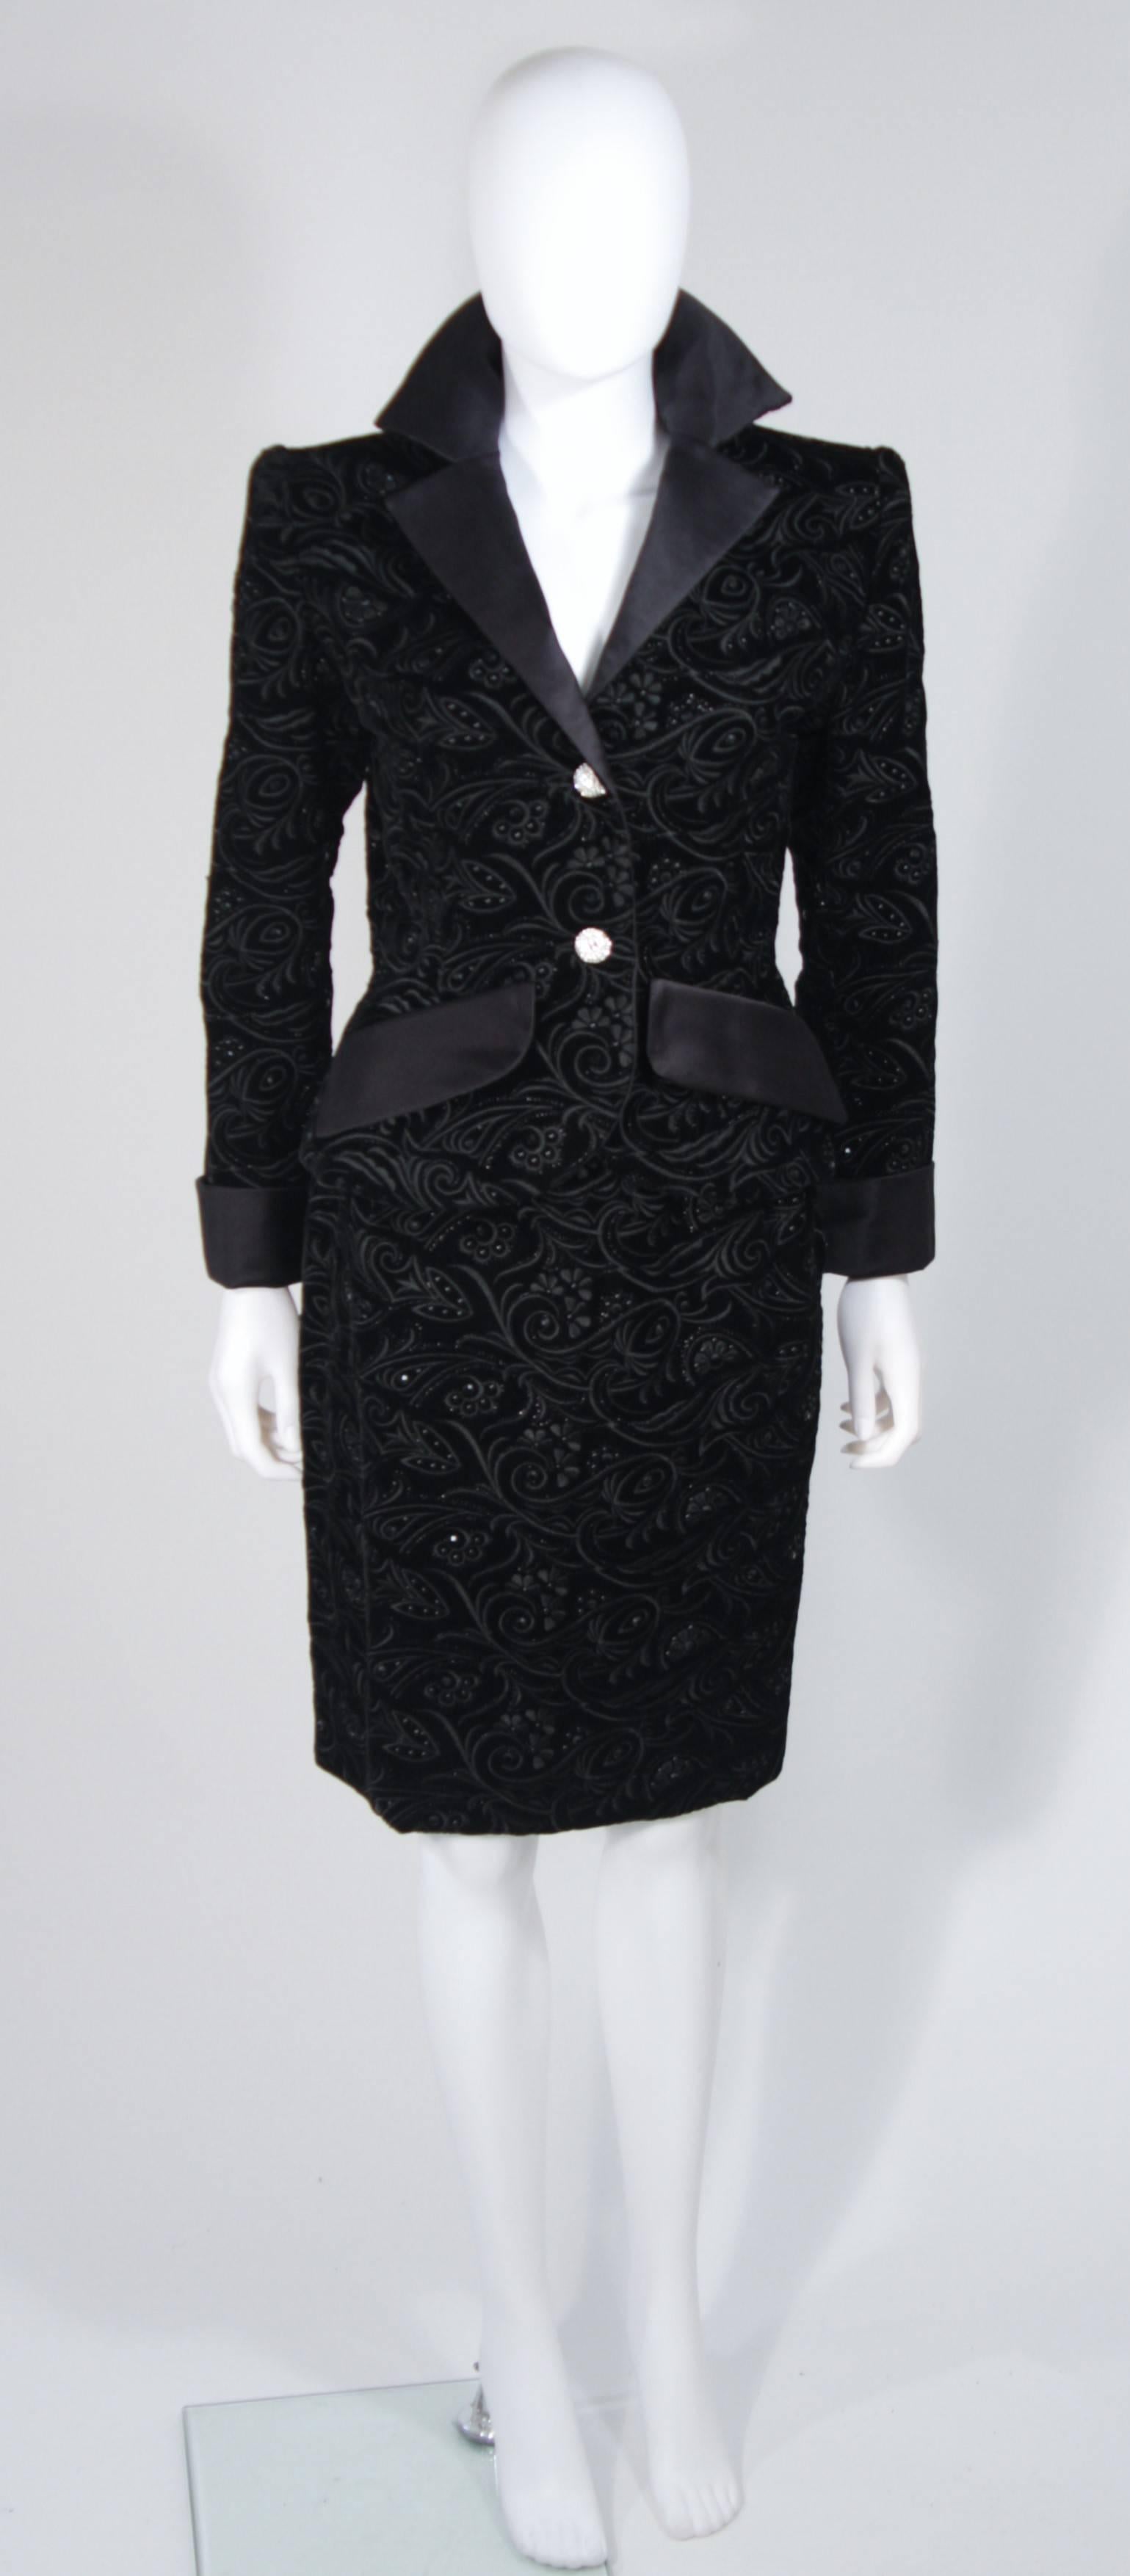  This Givenchy evening suit is composed of a black velvet, which is embroidered with a floral motif and adorned with rhinestones. The jacket features faux front pockets, center front rhinestone button closures, and silk trim. The skirt has a classic